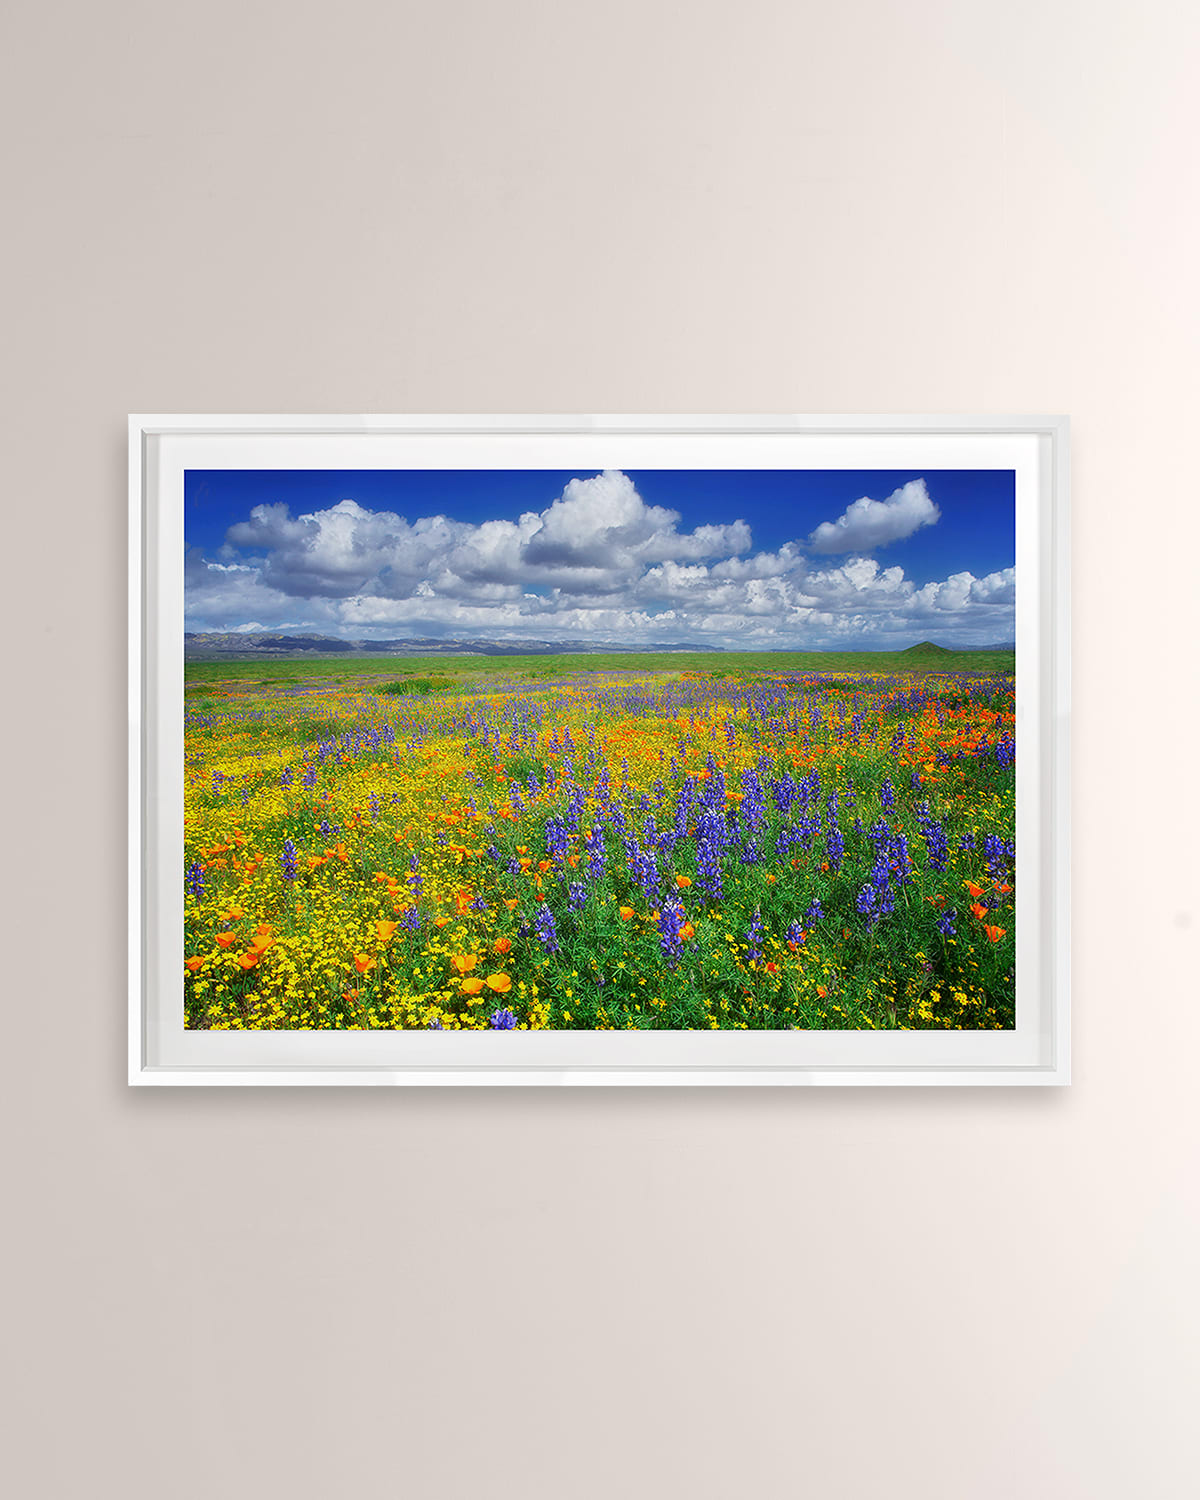 Grand Image Home Lupin And Poppies, Carrizo Plain National Monument Digital Art Print By Photodf In White